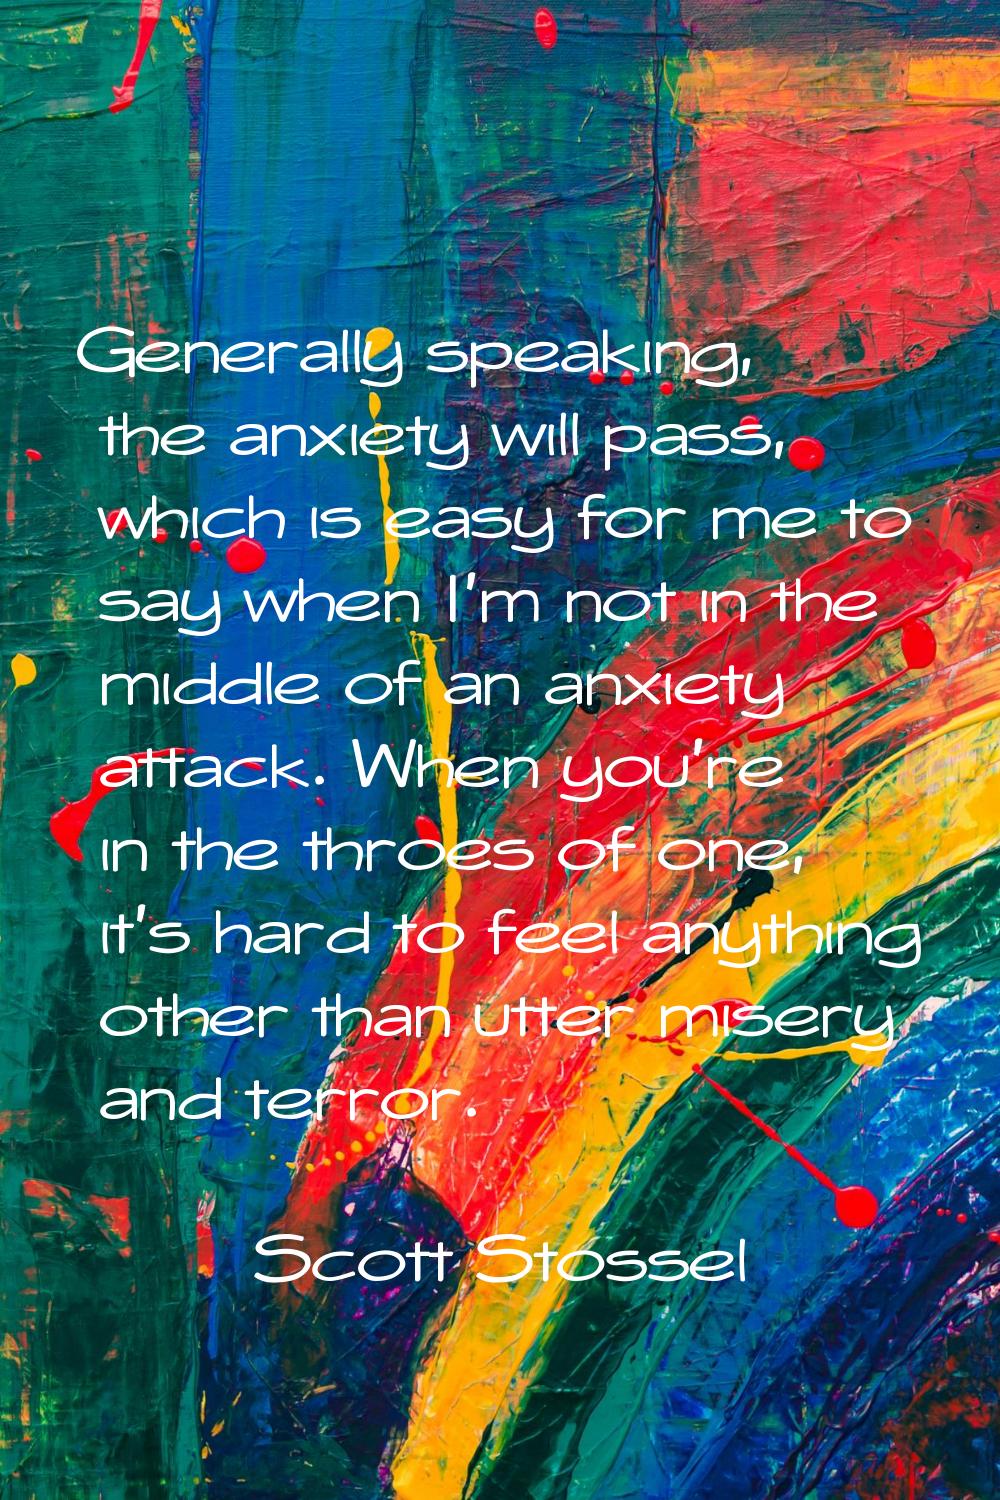 Generally speaking, the anxiety will pass, which is easy for me to say when I'm not in the middle o